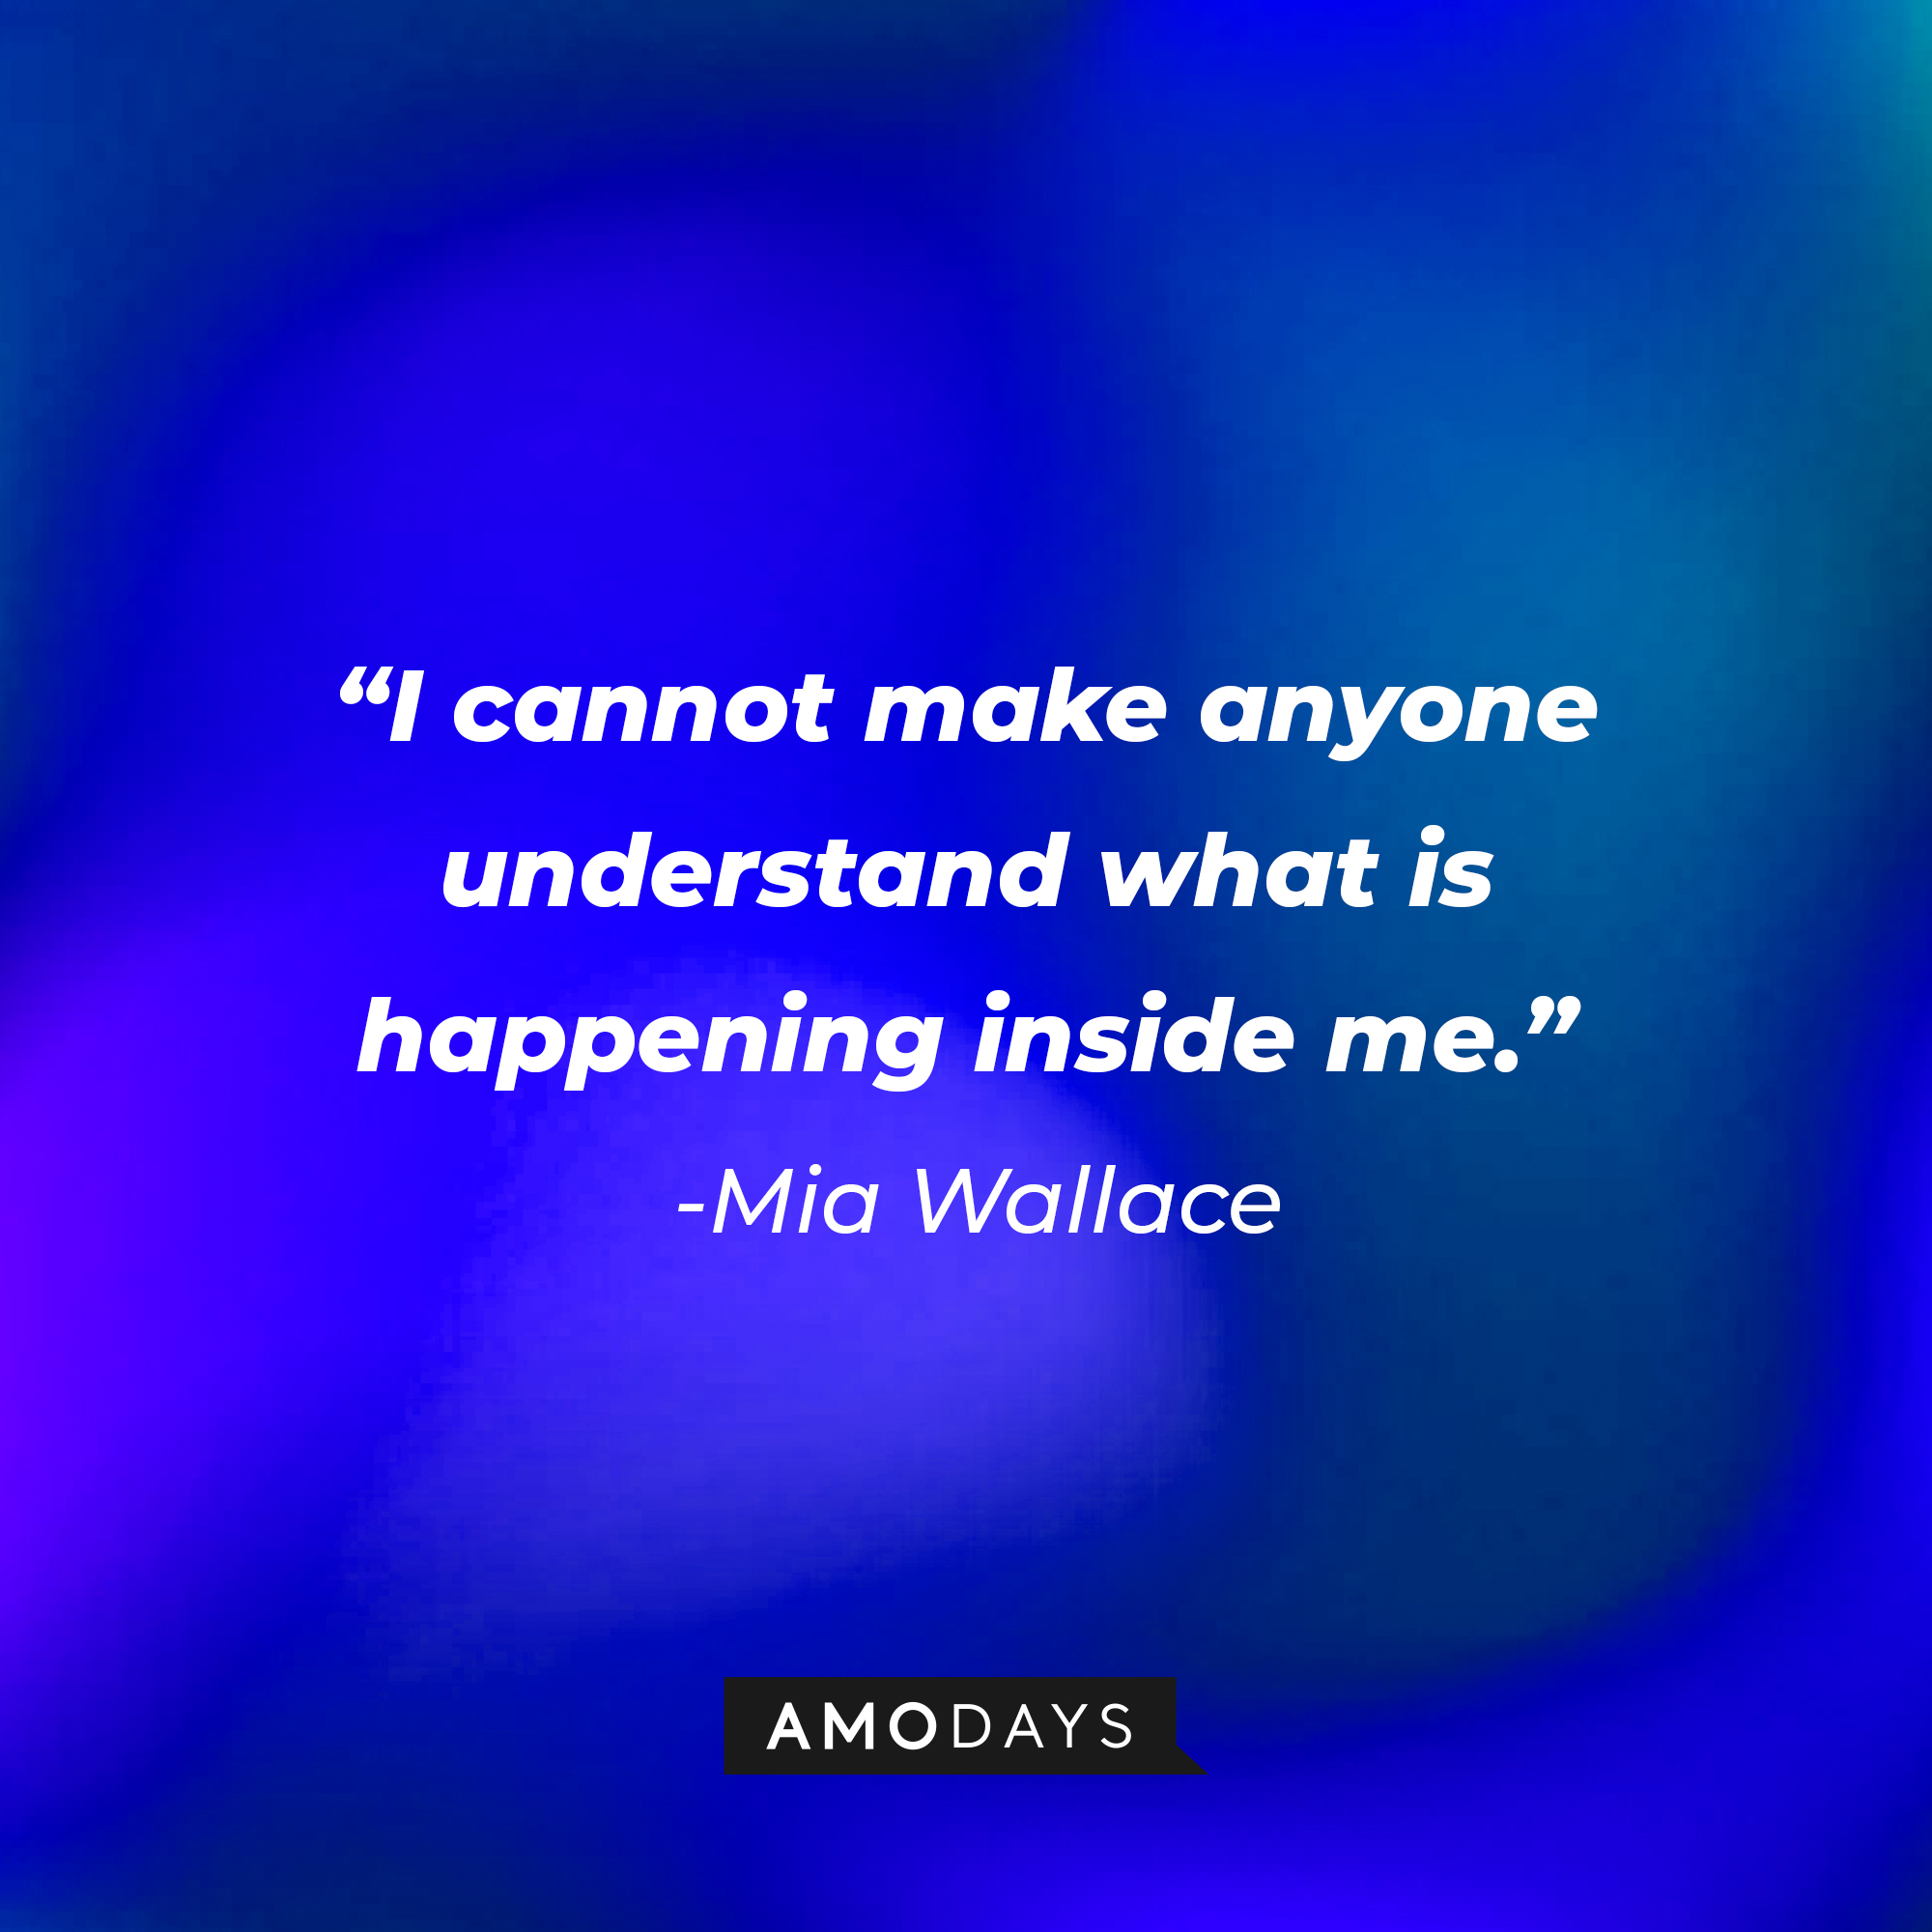 Mia Wallace’s quote: “I cannot make anyone understand what is happening inside me.” | Source: AmoDays